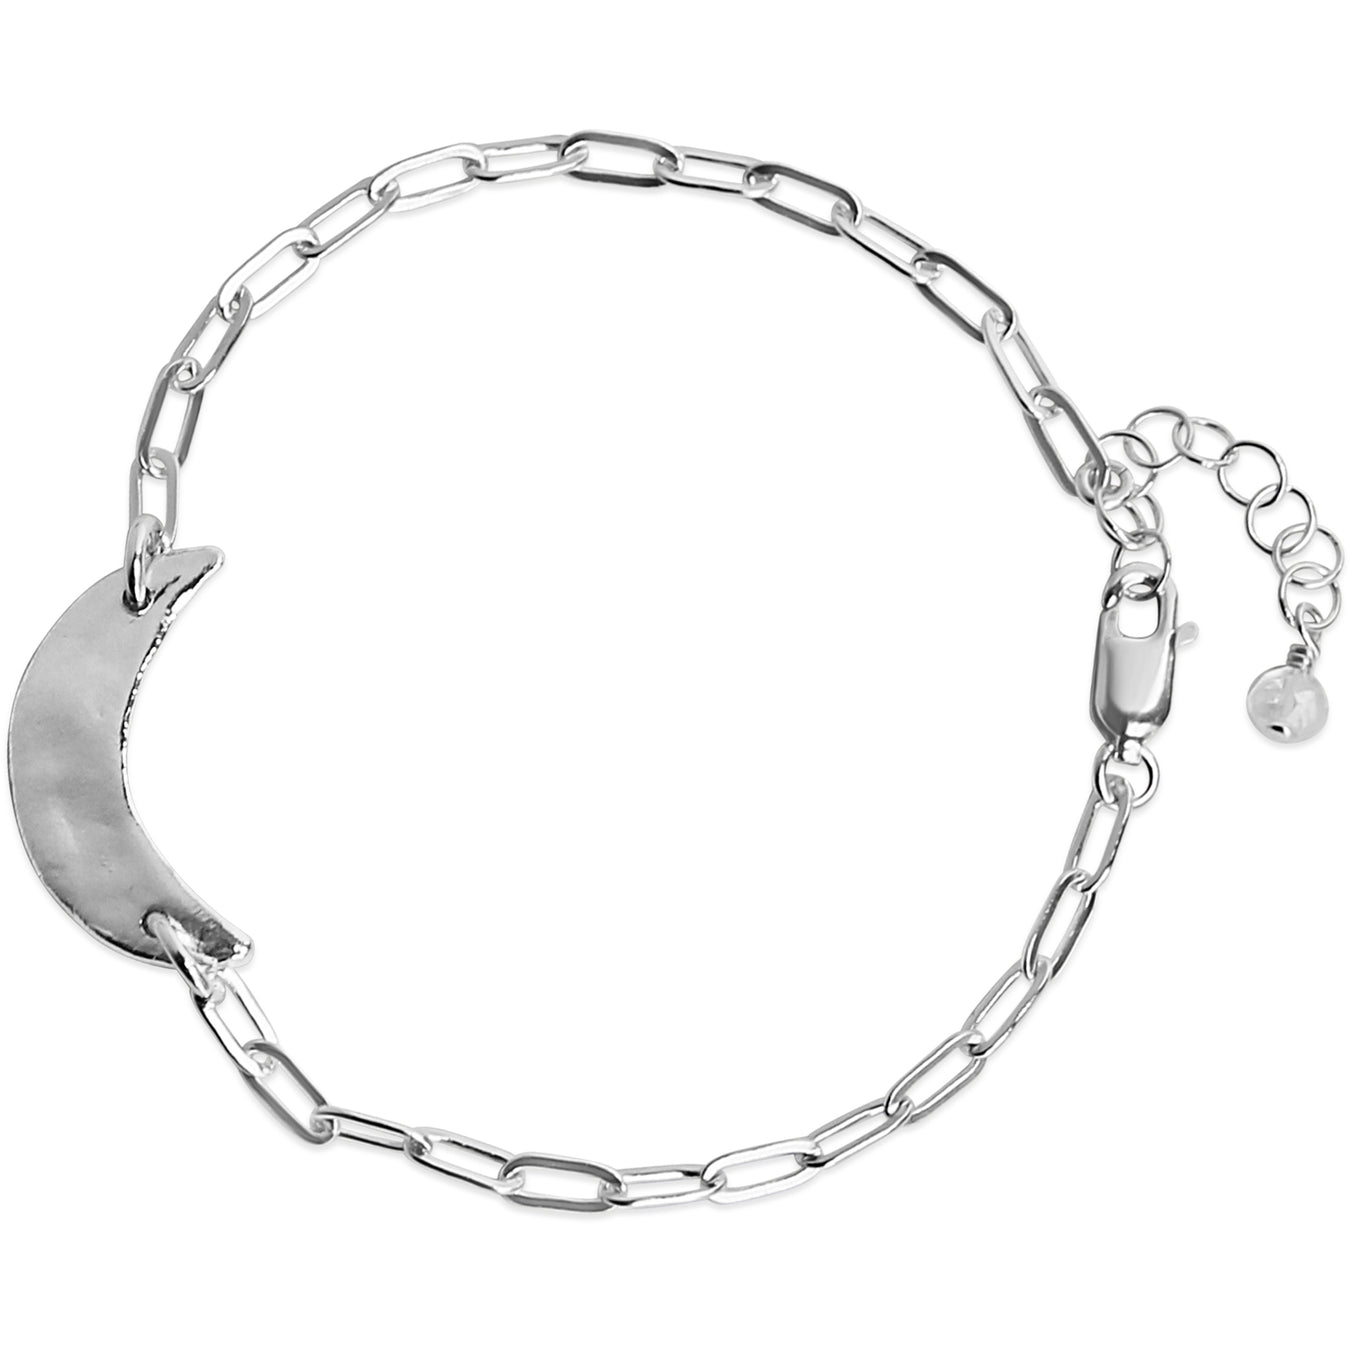 Crescent Moon Bracelet with silver chain - Blooming Lotus Jewelry